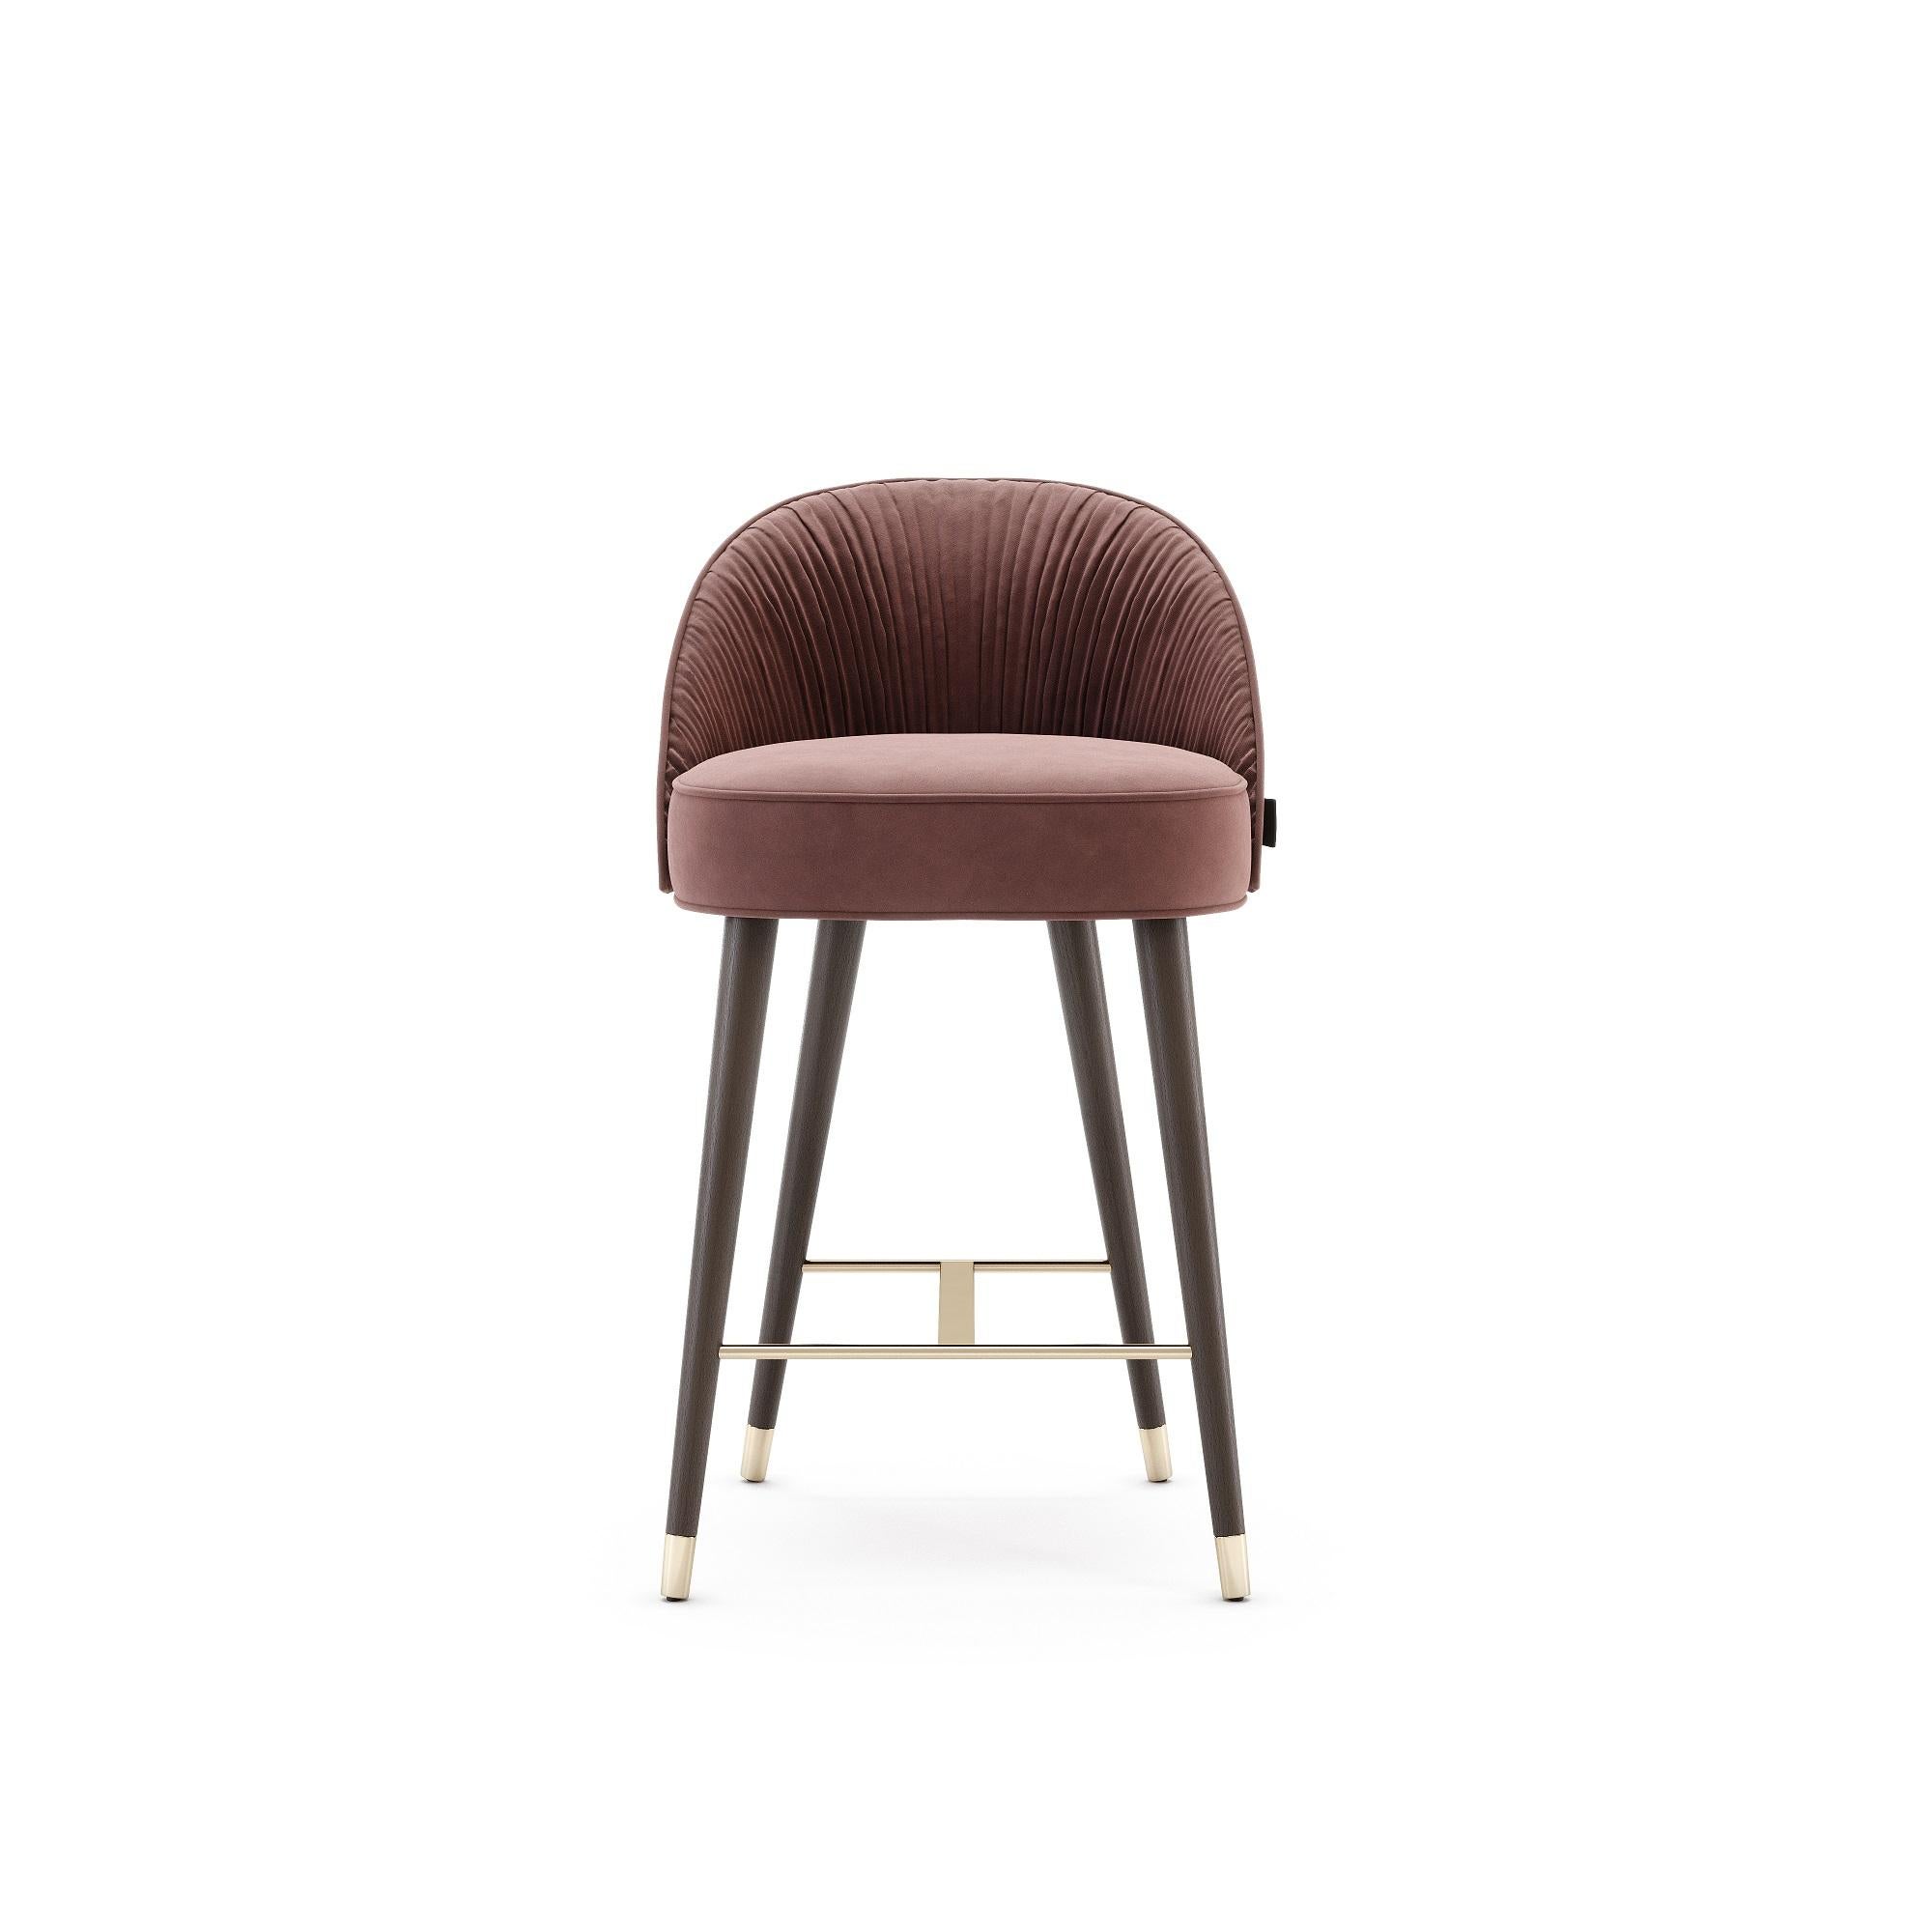 The contemporary counter chairs hold a stimulating design, as they hold an elegant combination of handmade couture techniques, wood, and metal. Their shapes are inspired by the unique French couture and each detail will elegantly flow inside of an